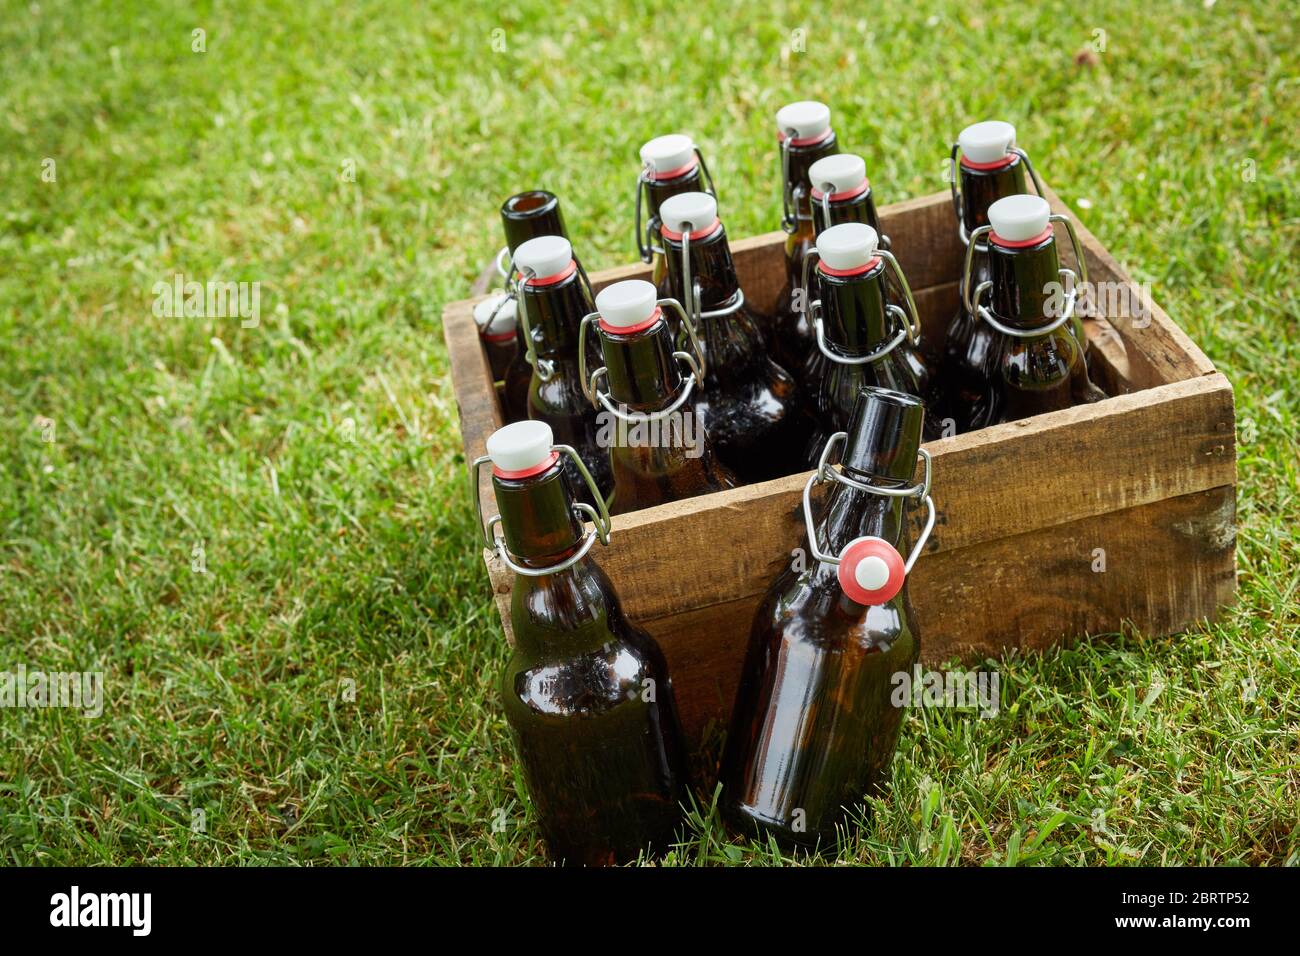 Wooden crate with unlabelled bottles of beer or lager at a tilted angle  outdoors on green grass with copy space for a summer picnic Stock Photo -  Alamy